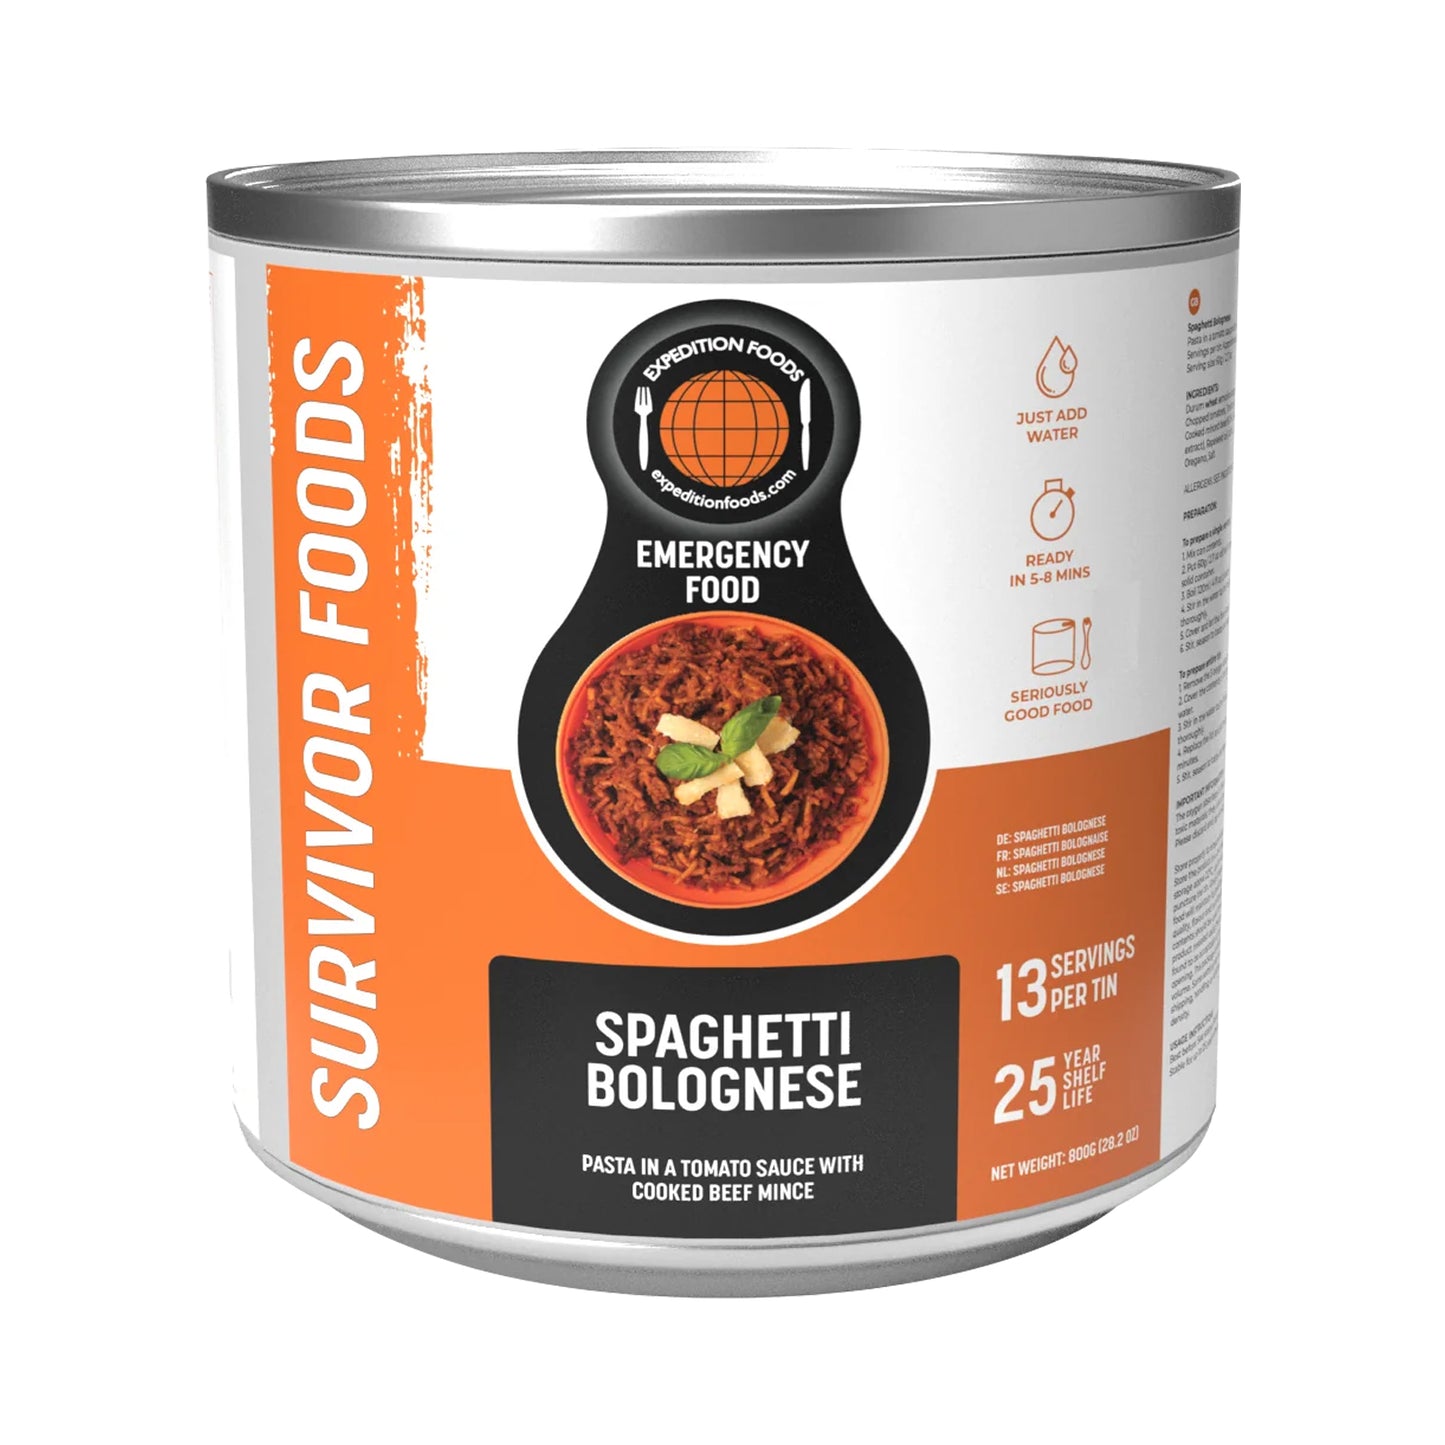 Expedition Foods Spaghetti Bolognese Meal Tins